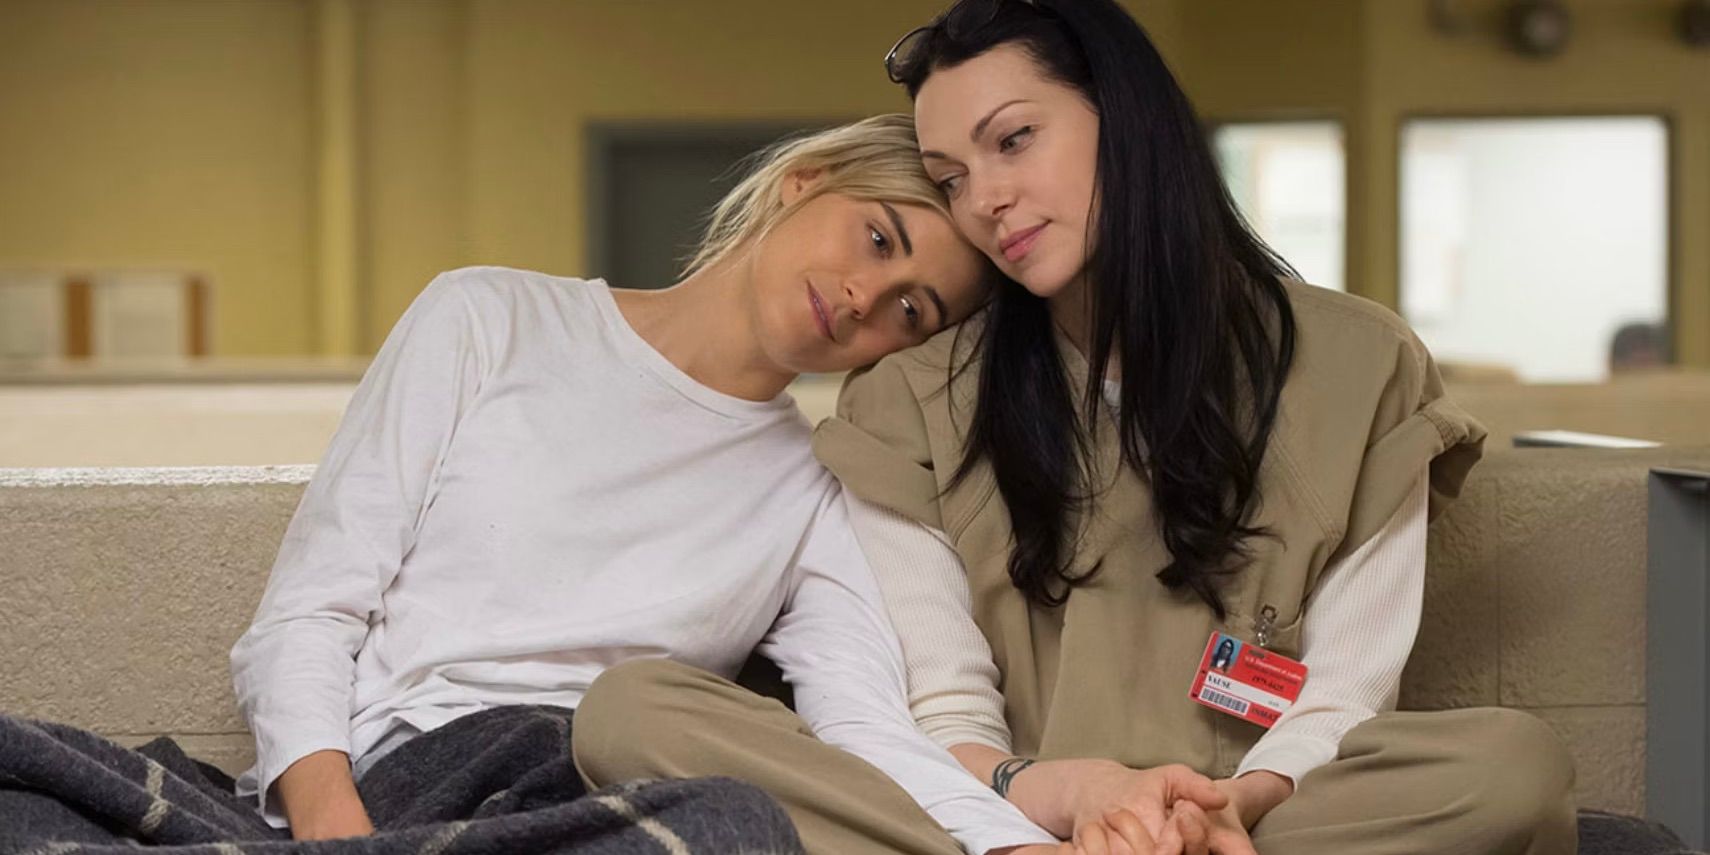 Piper Chapman (Taylor Schilling) with her head on Alex Vause's (Laura Prepon) shoulder in Orange is the New Black